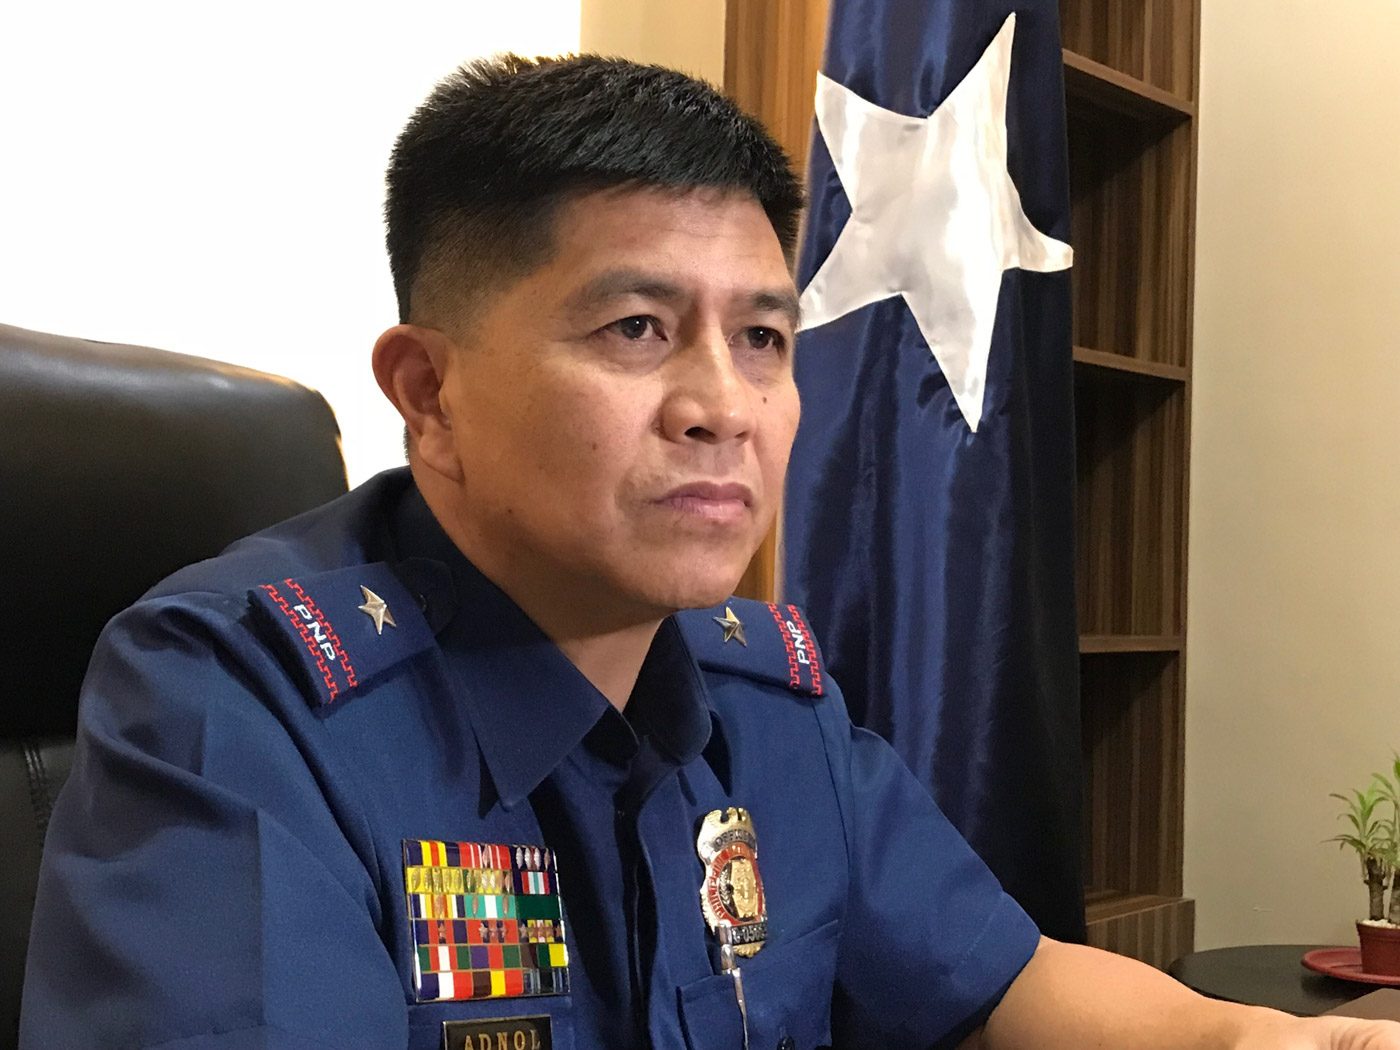 PNP drug enforcement chief: No need for body cameras, we have God